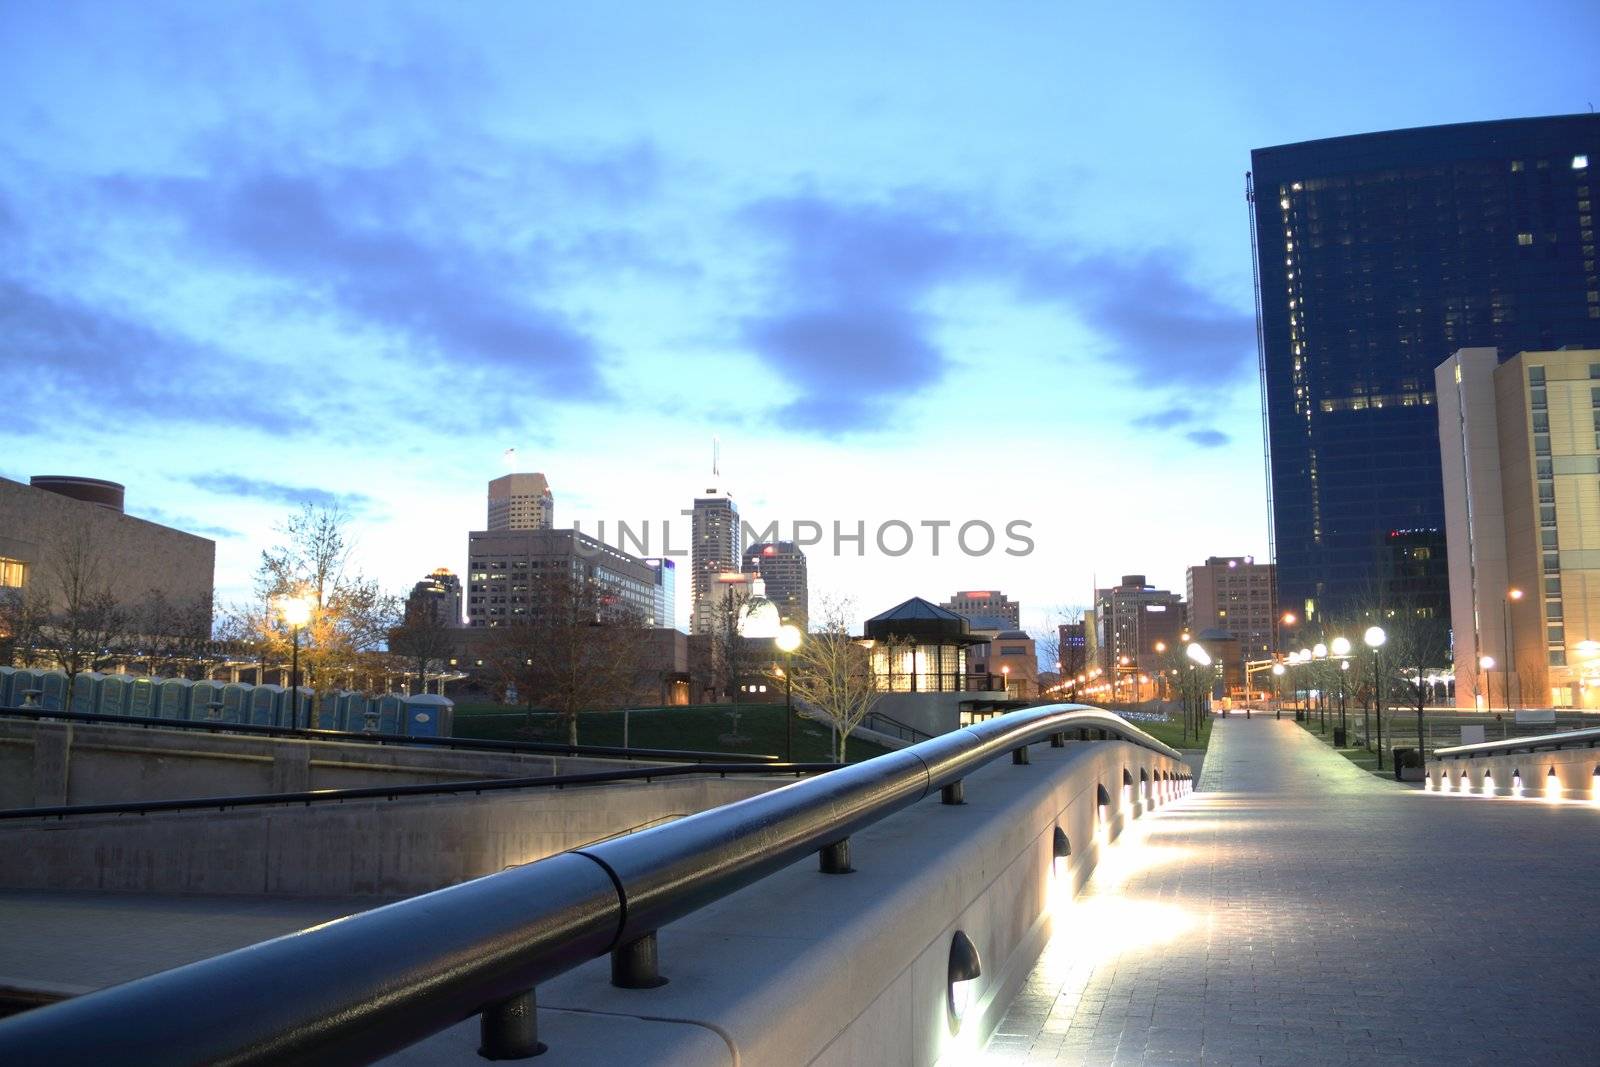 A city walkway leading into a downtown area while the dawn lights the sky.